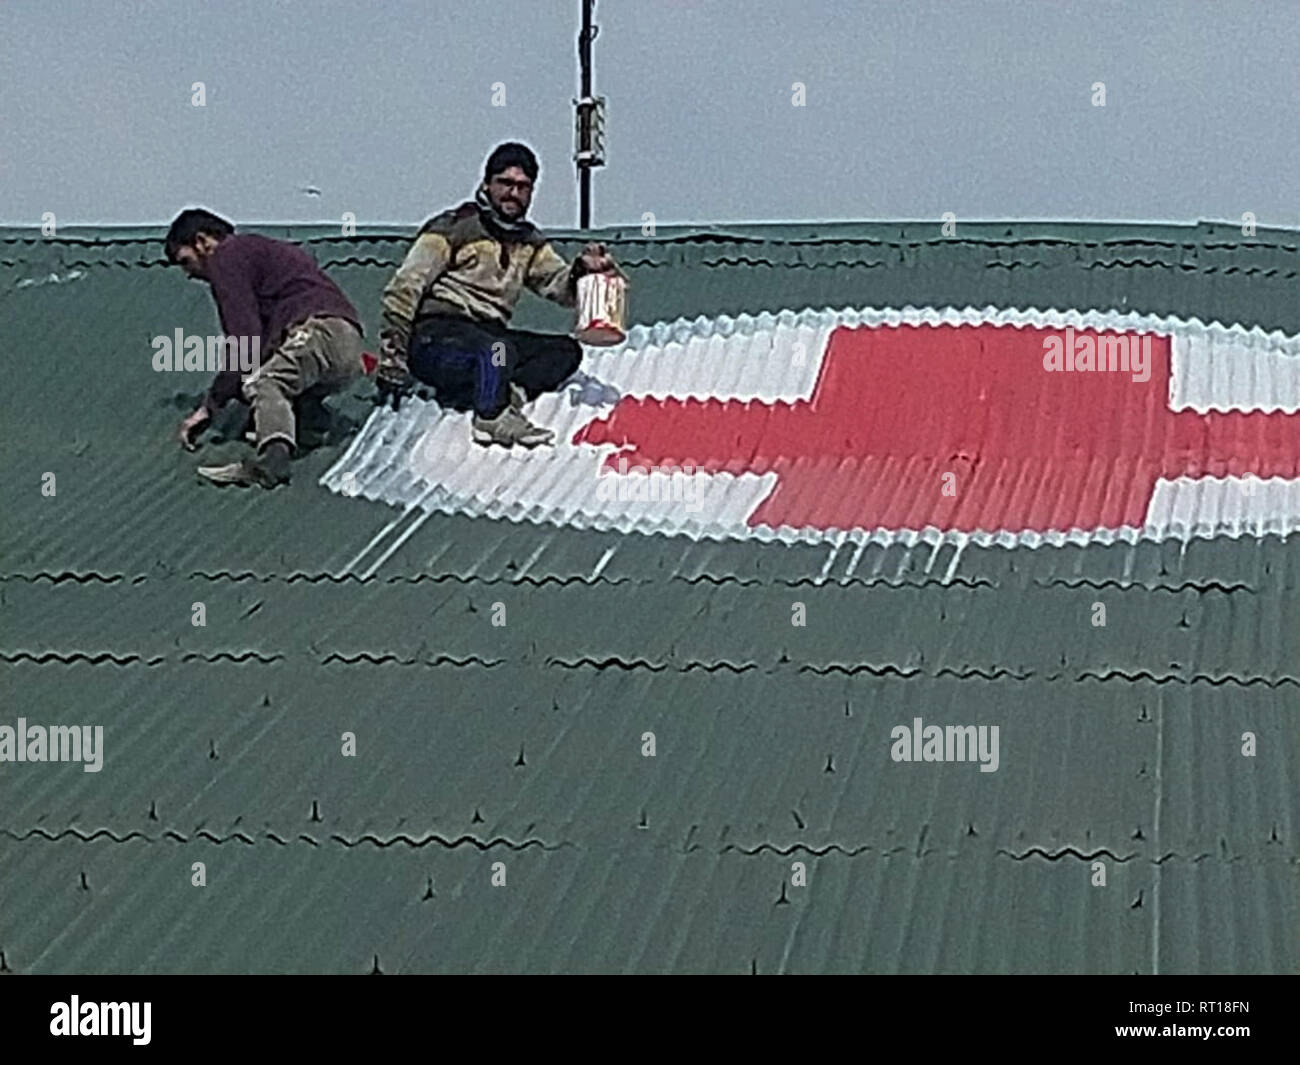 Srinagar, Kashmir. 27th Feb 2019.A Kashmiri worker paints the red and white medical emblem of cross on the roof of SMHS hospital as tensions escalate between India and Pakistan Credit: sofi suhail/Alamy Live News Stock Photo